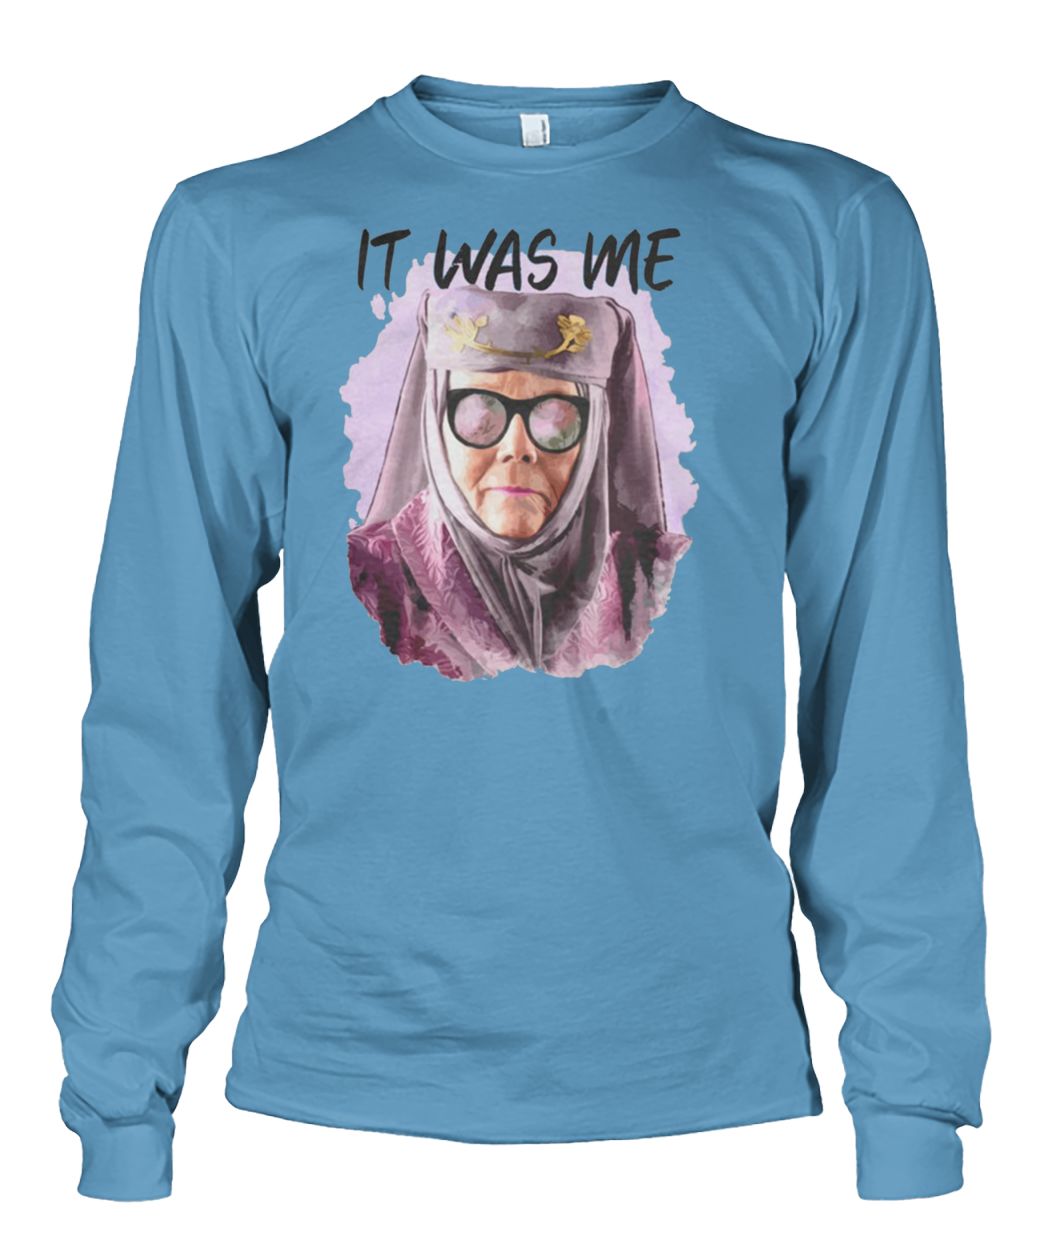 Olenna tyrell tell cersei it was me game of thrones unisex long sleeve